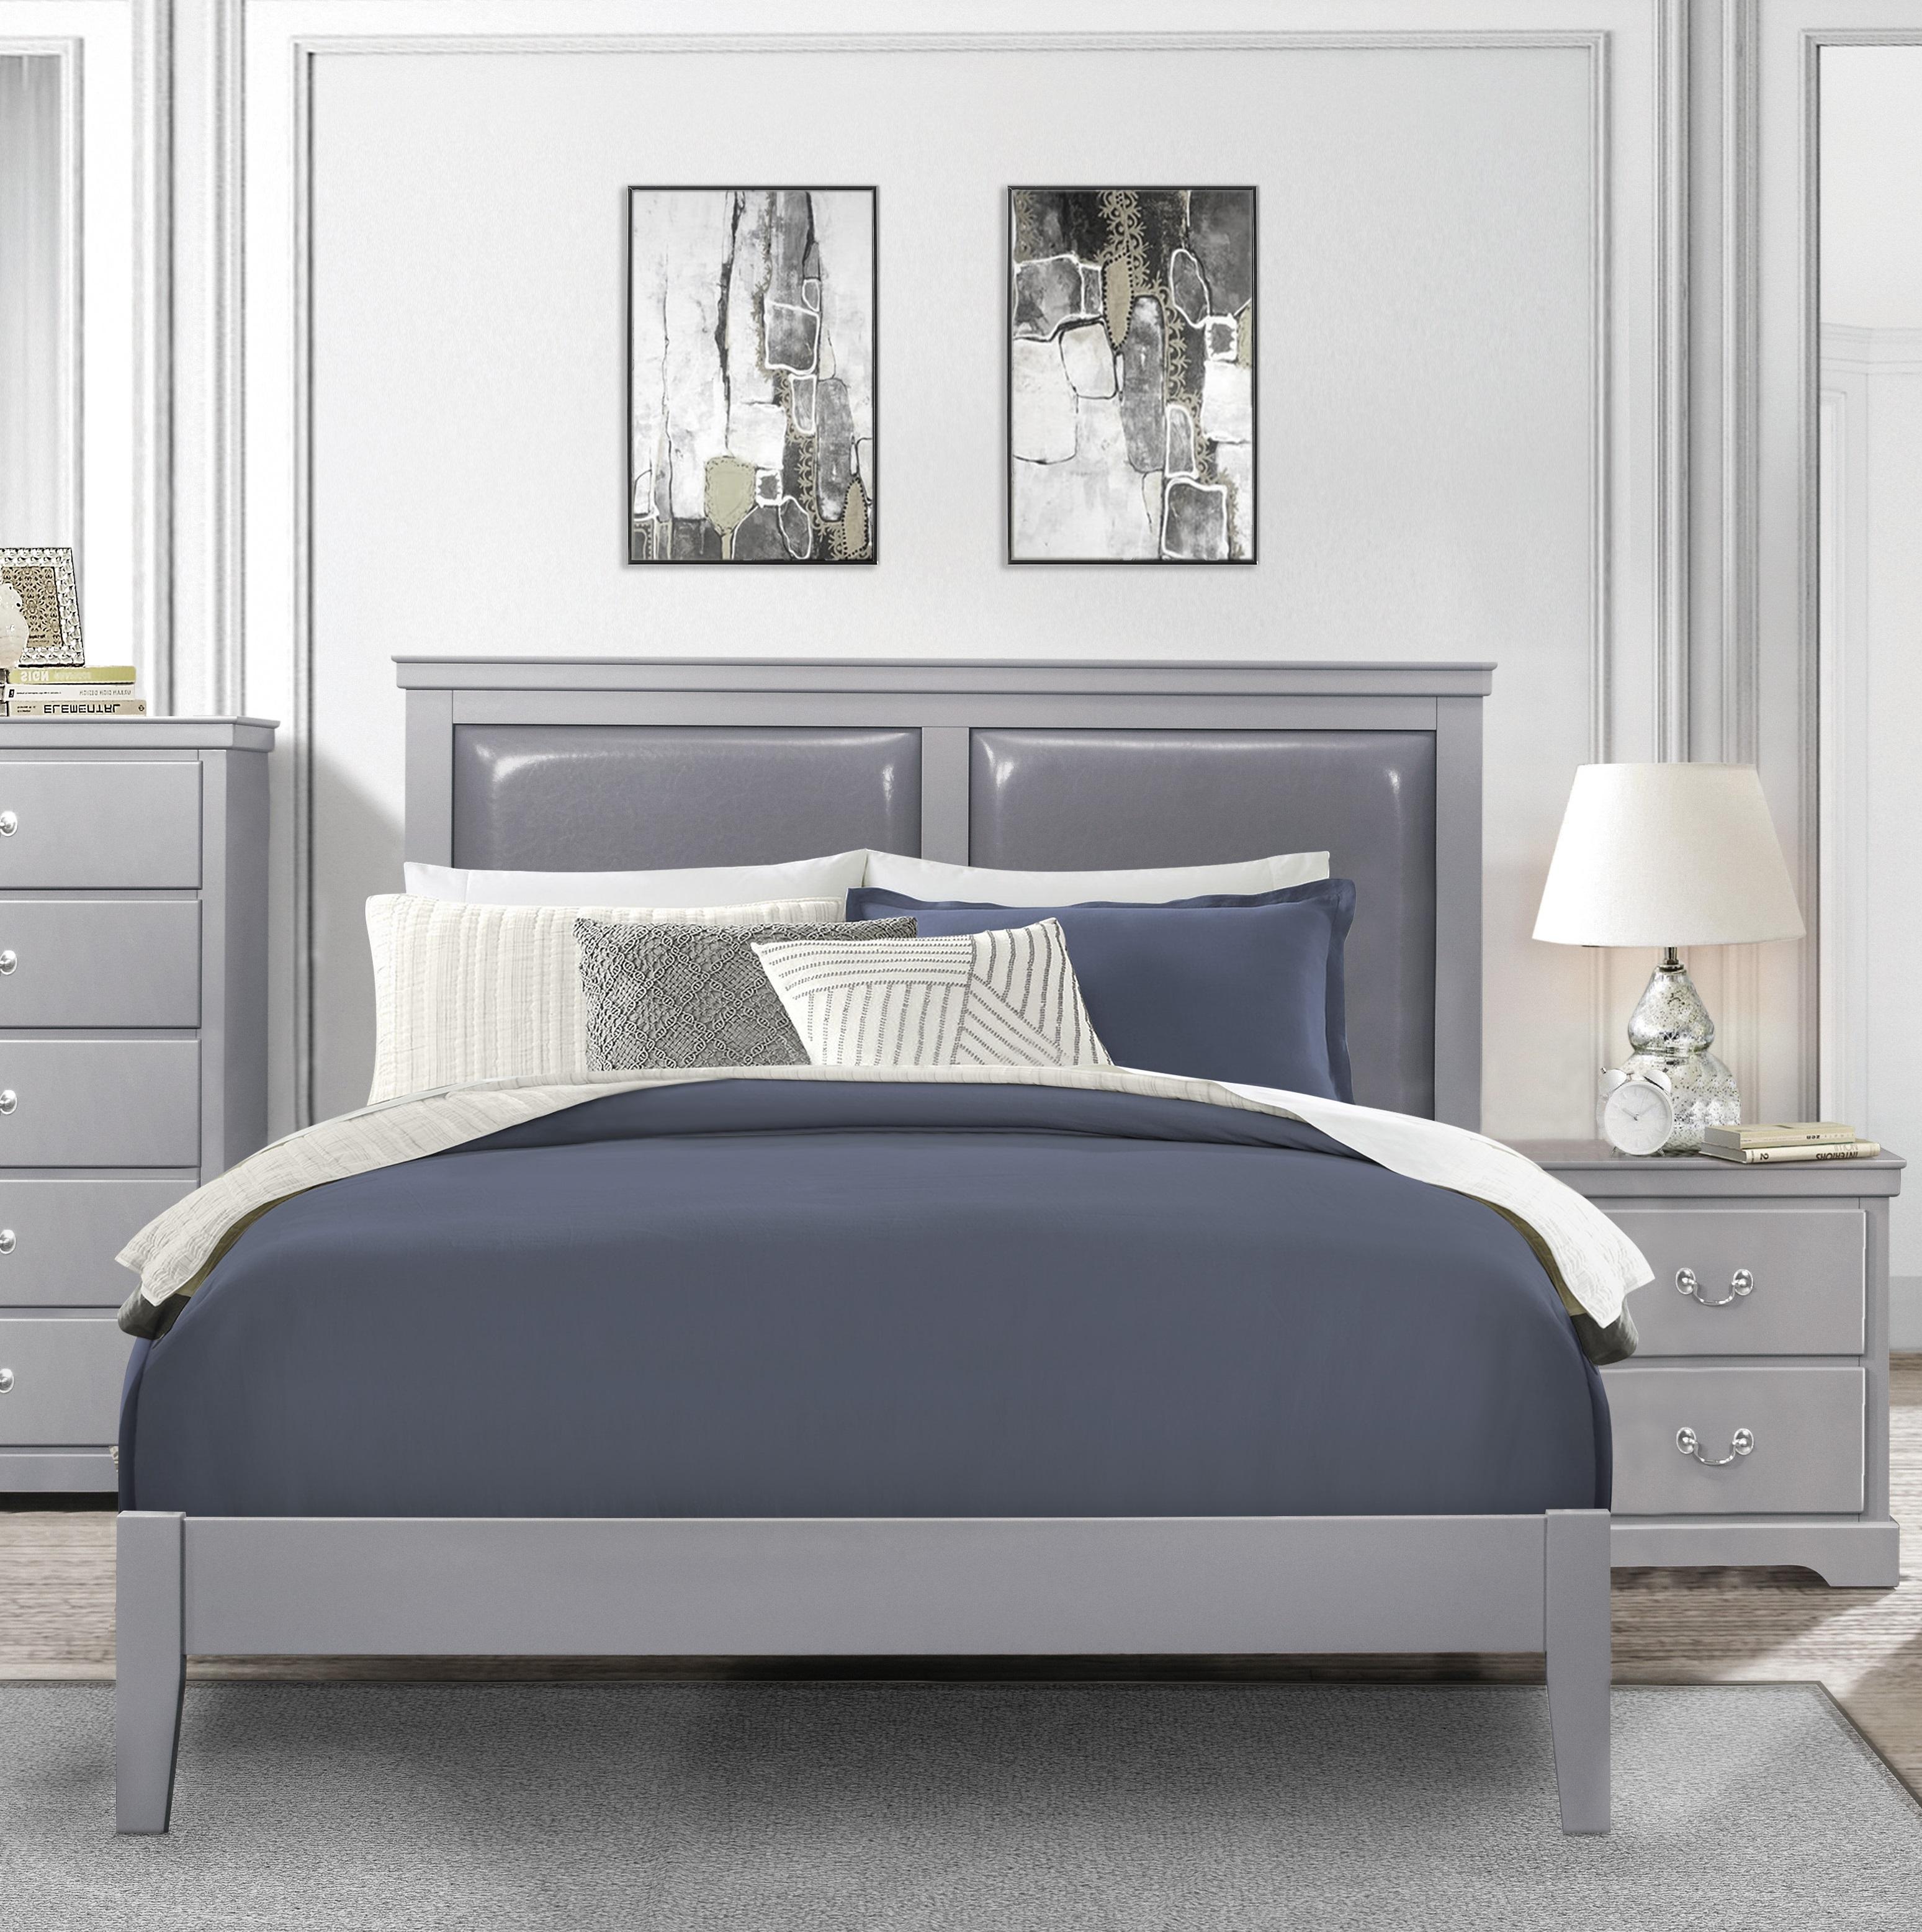 

    
Modern Gray Wood Queen Bedroom Set 3pcs Homelegance 1519GY-1* Seabright
